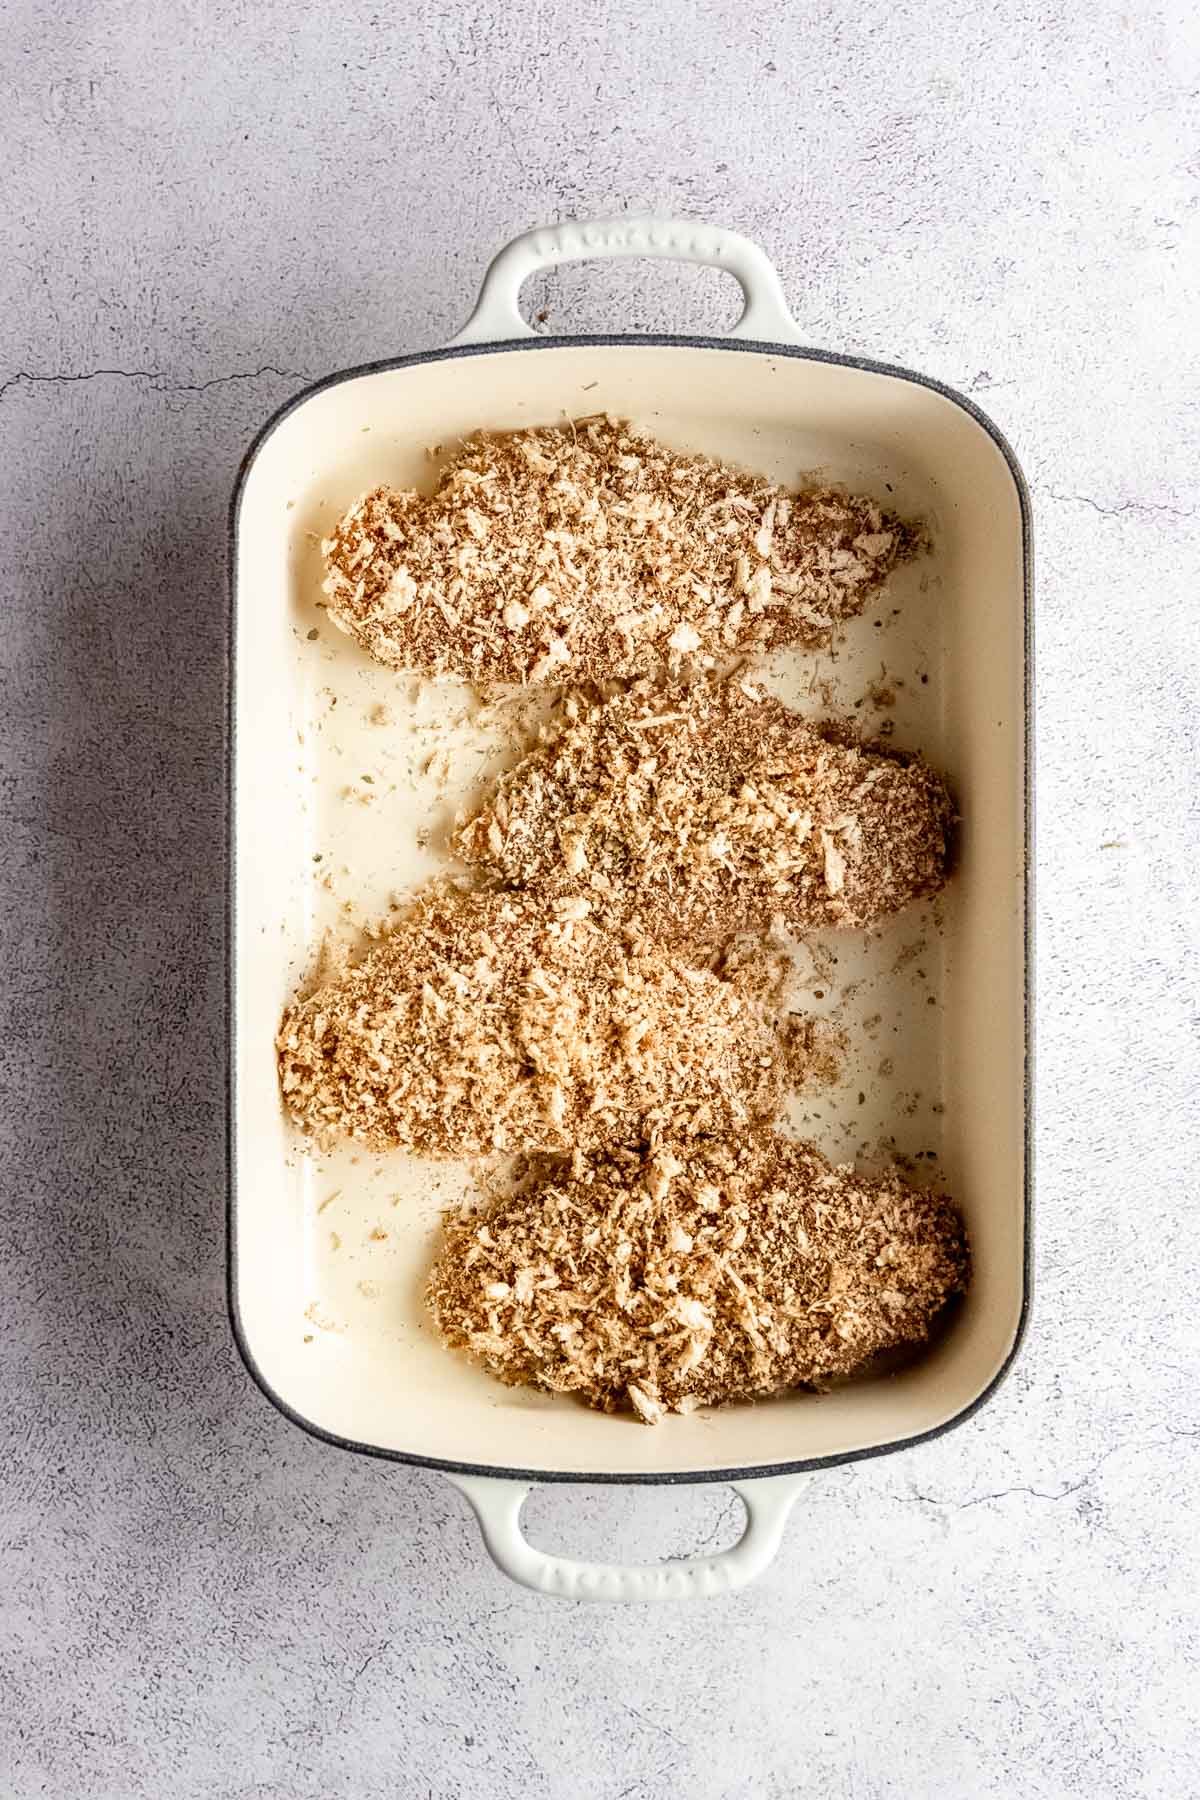 Panko coated chicken in a baking dish.